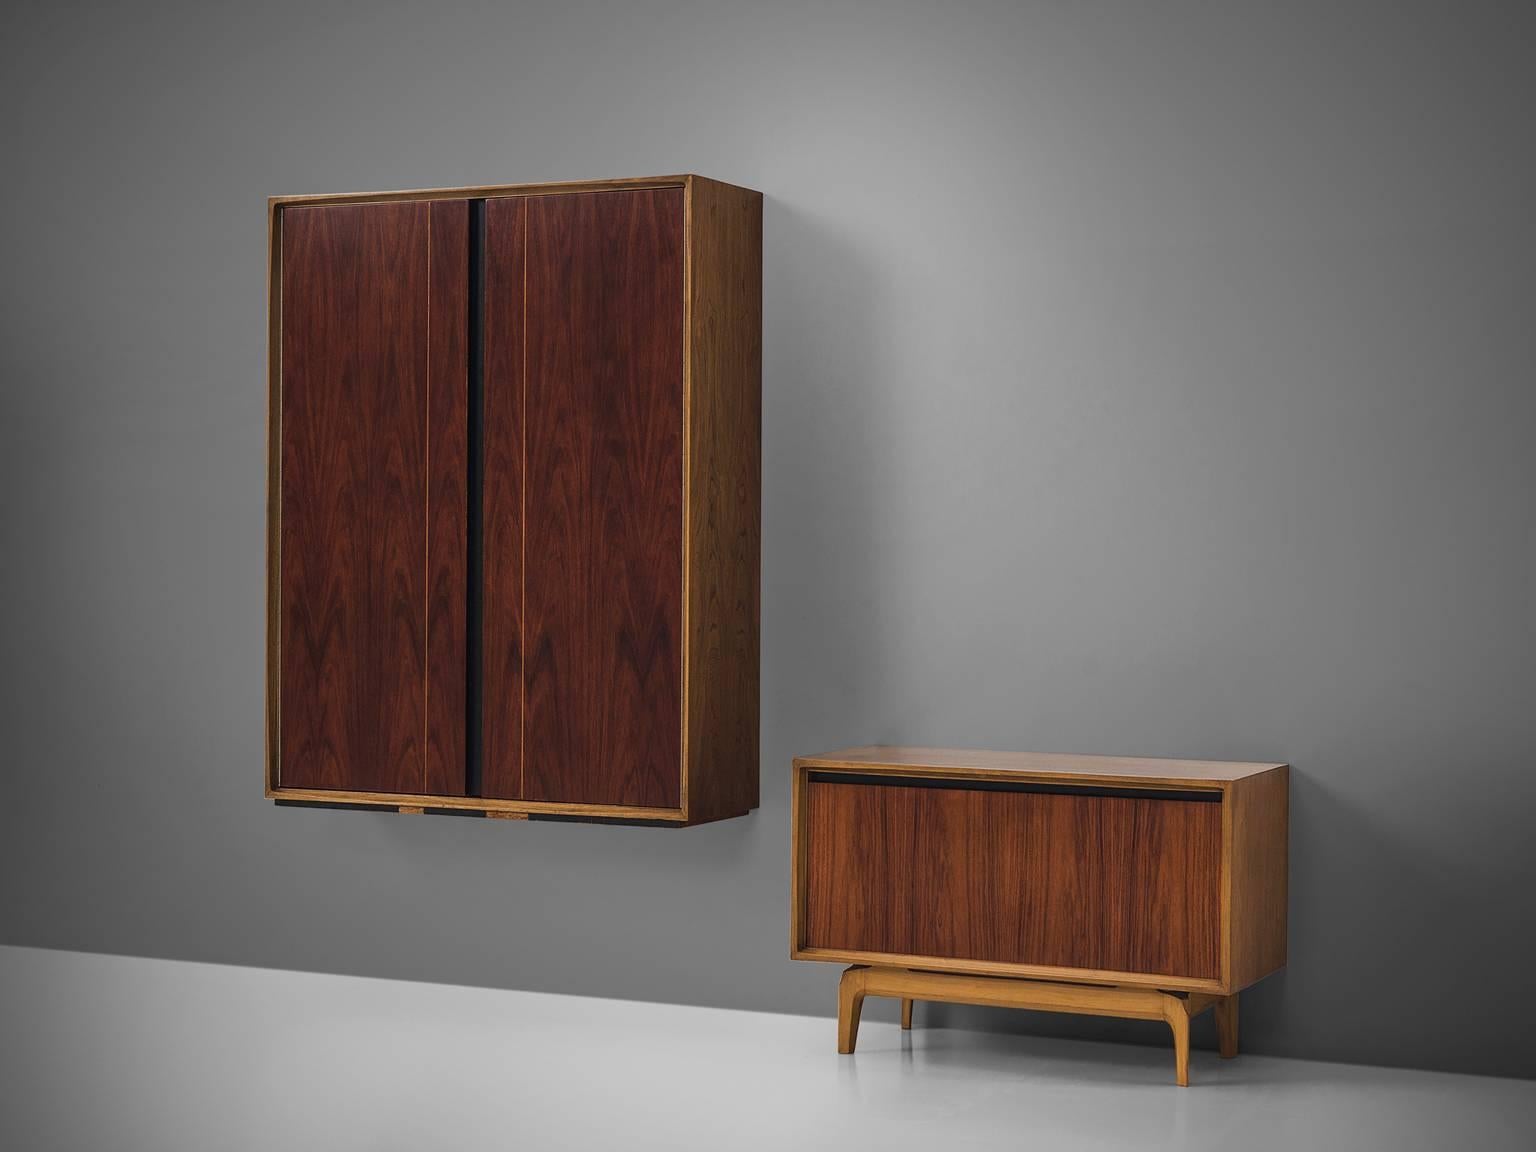 De Coene 'Madison' Credenza in Rosewood and Walnut 1